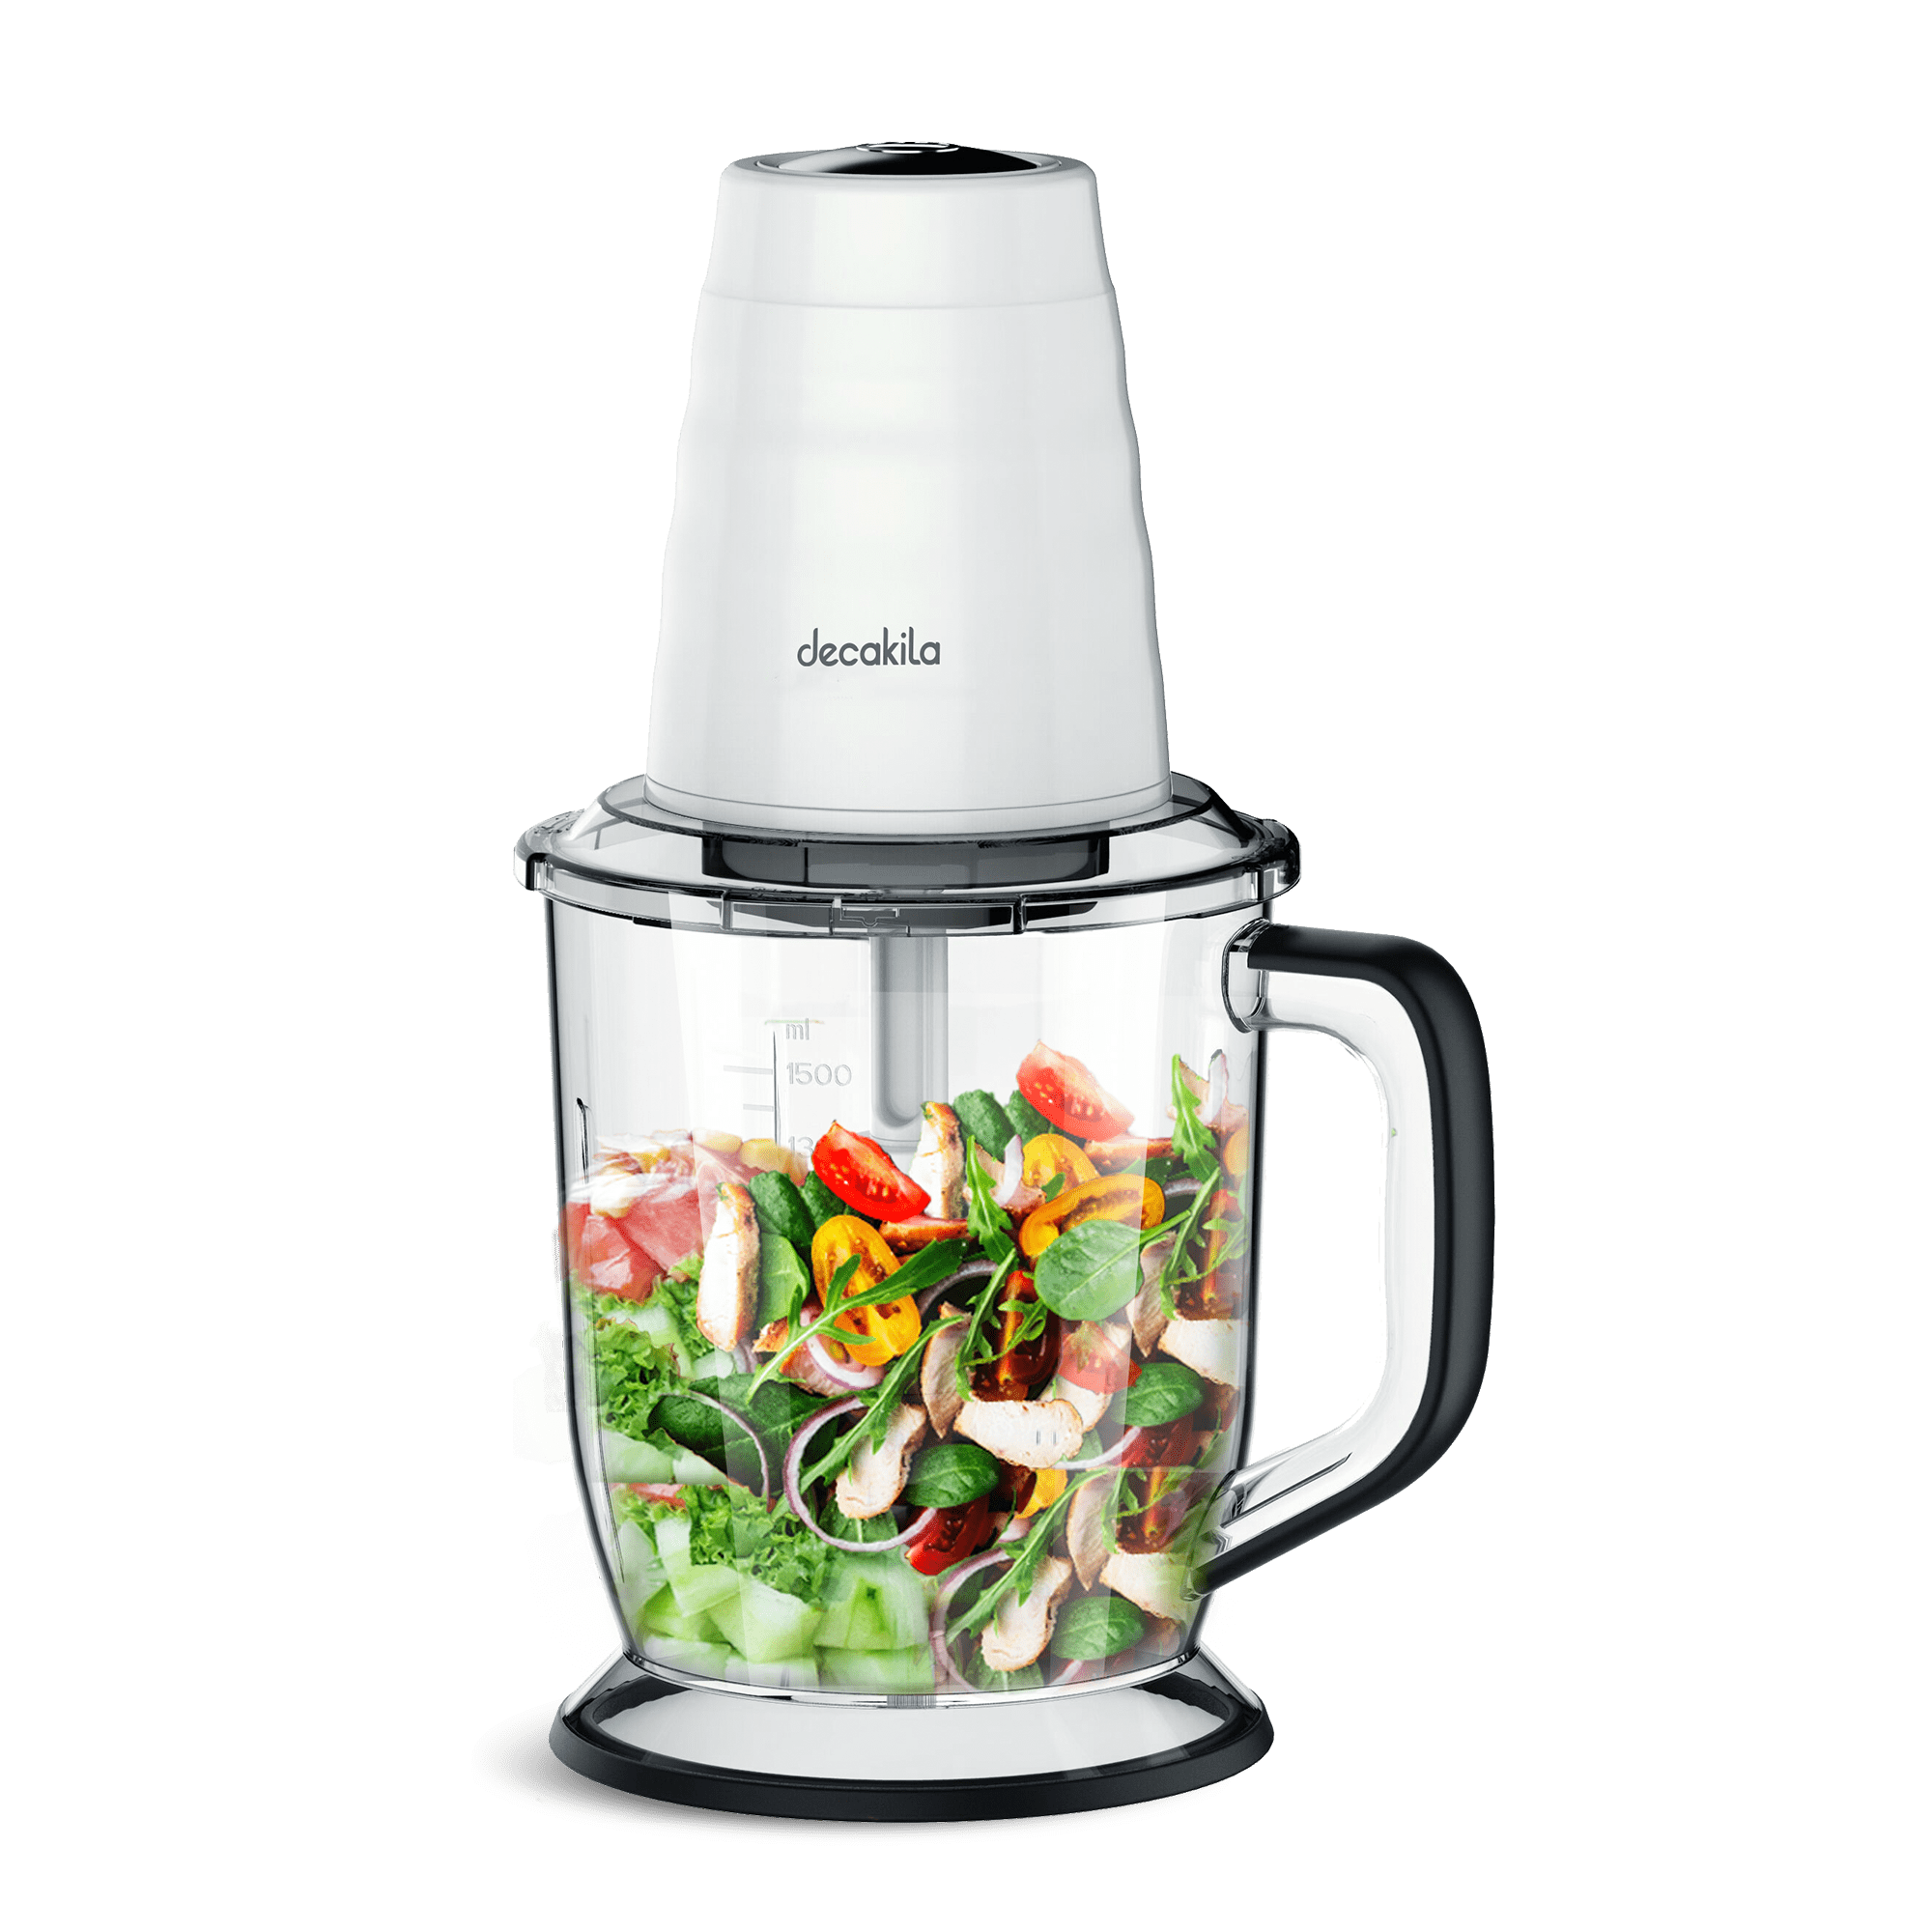 Decakila 1.5L Electric Chopper 400W - KEMG012W | Buy Online in Accra, Ghana - Supply Master Kitchen Appliances Buy Tools hardware Building materials